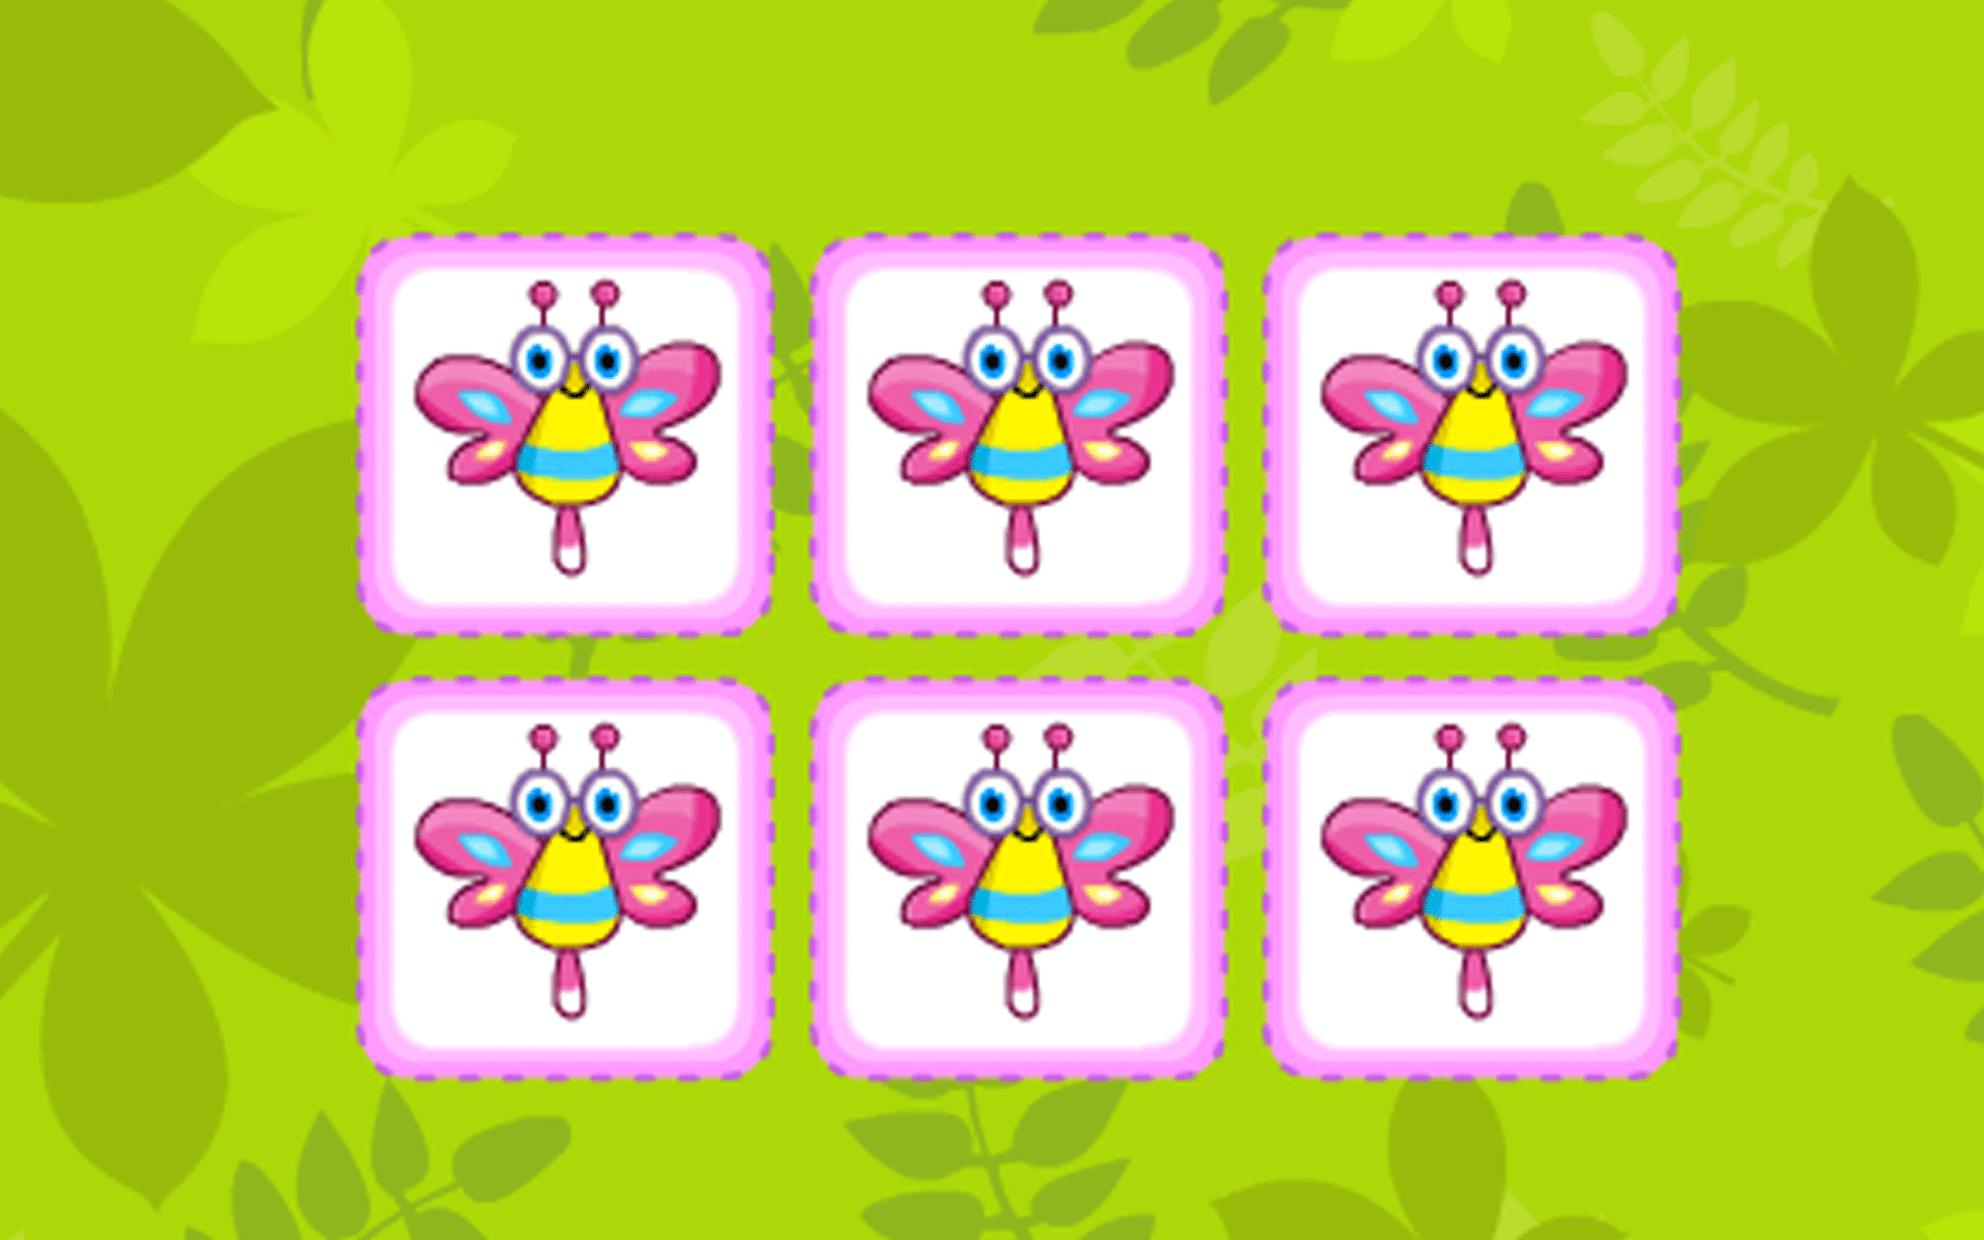 Butterfly Matching Quick_游戏简介_图4